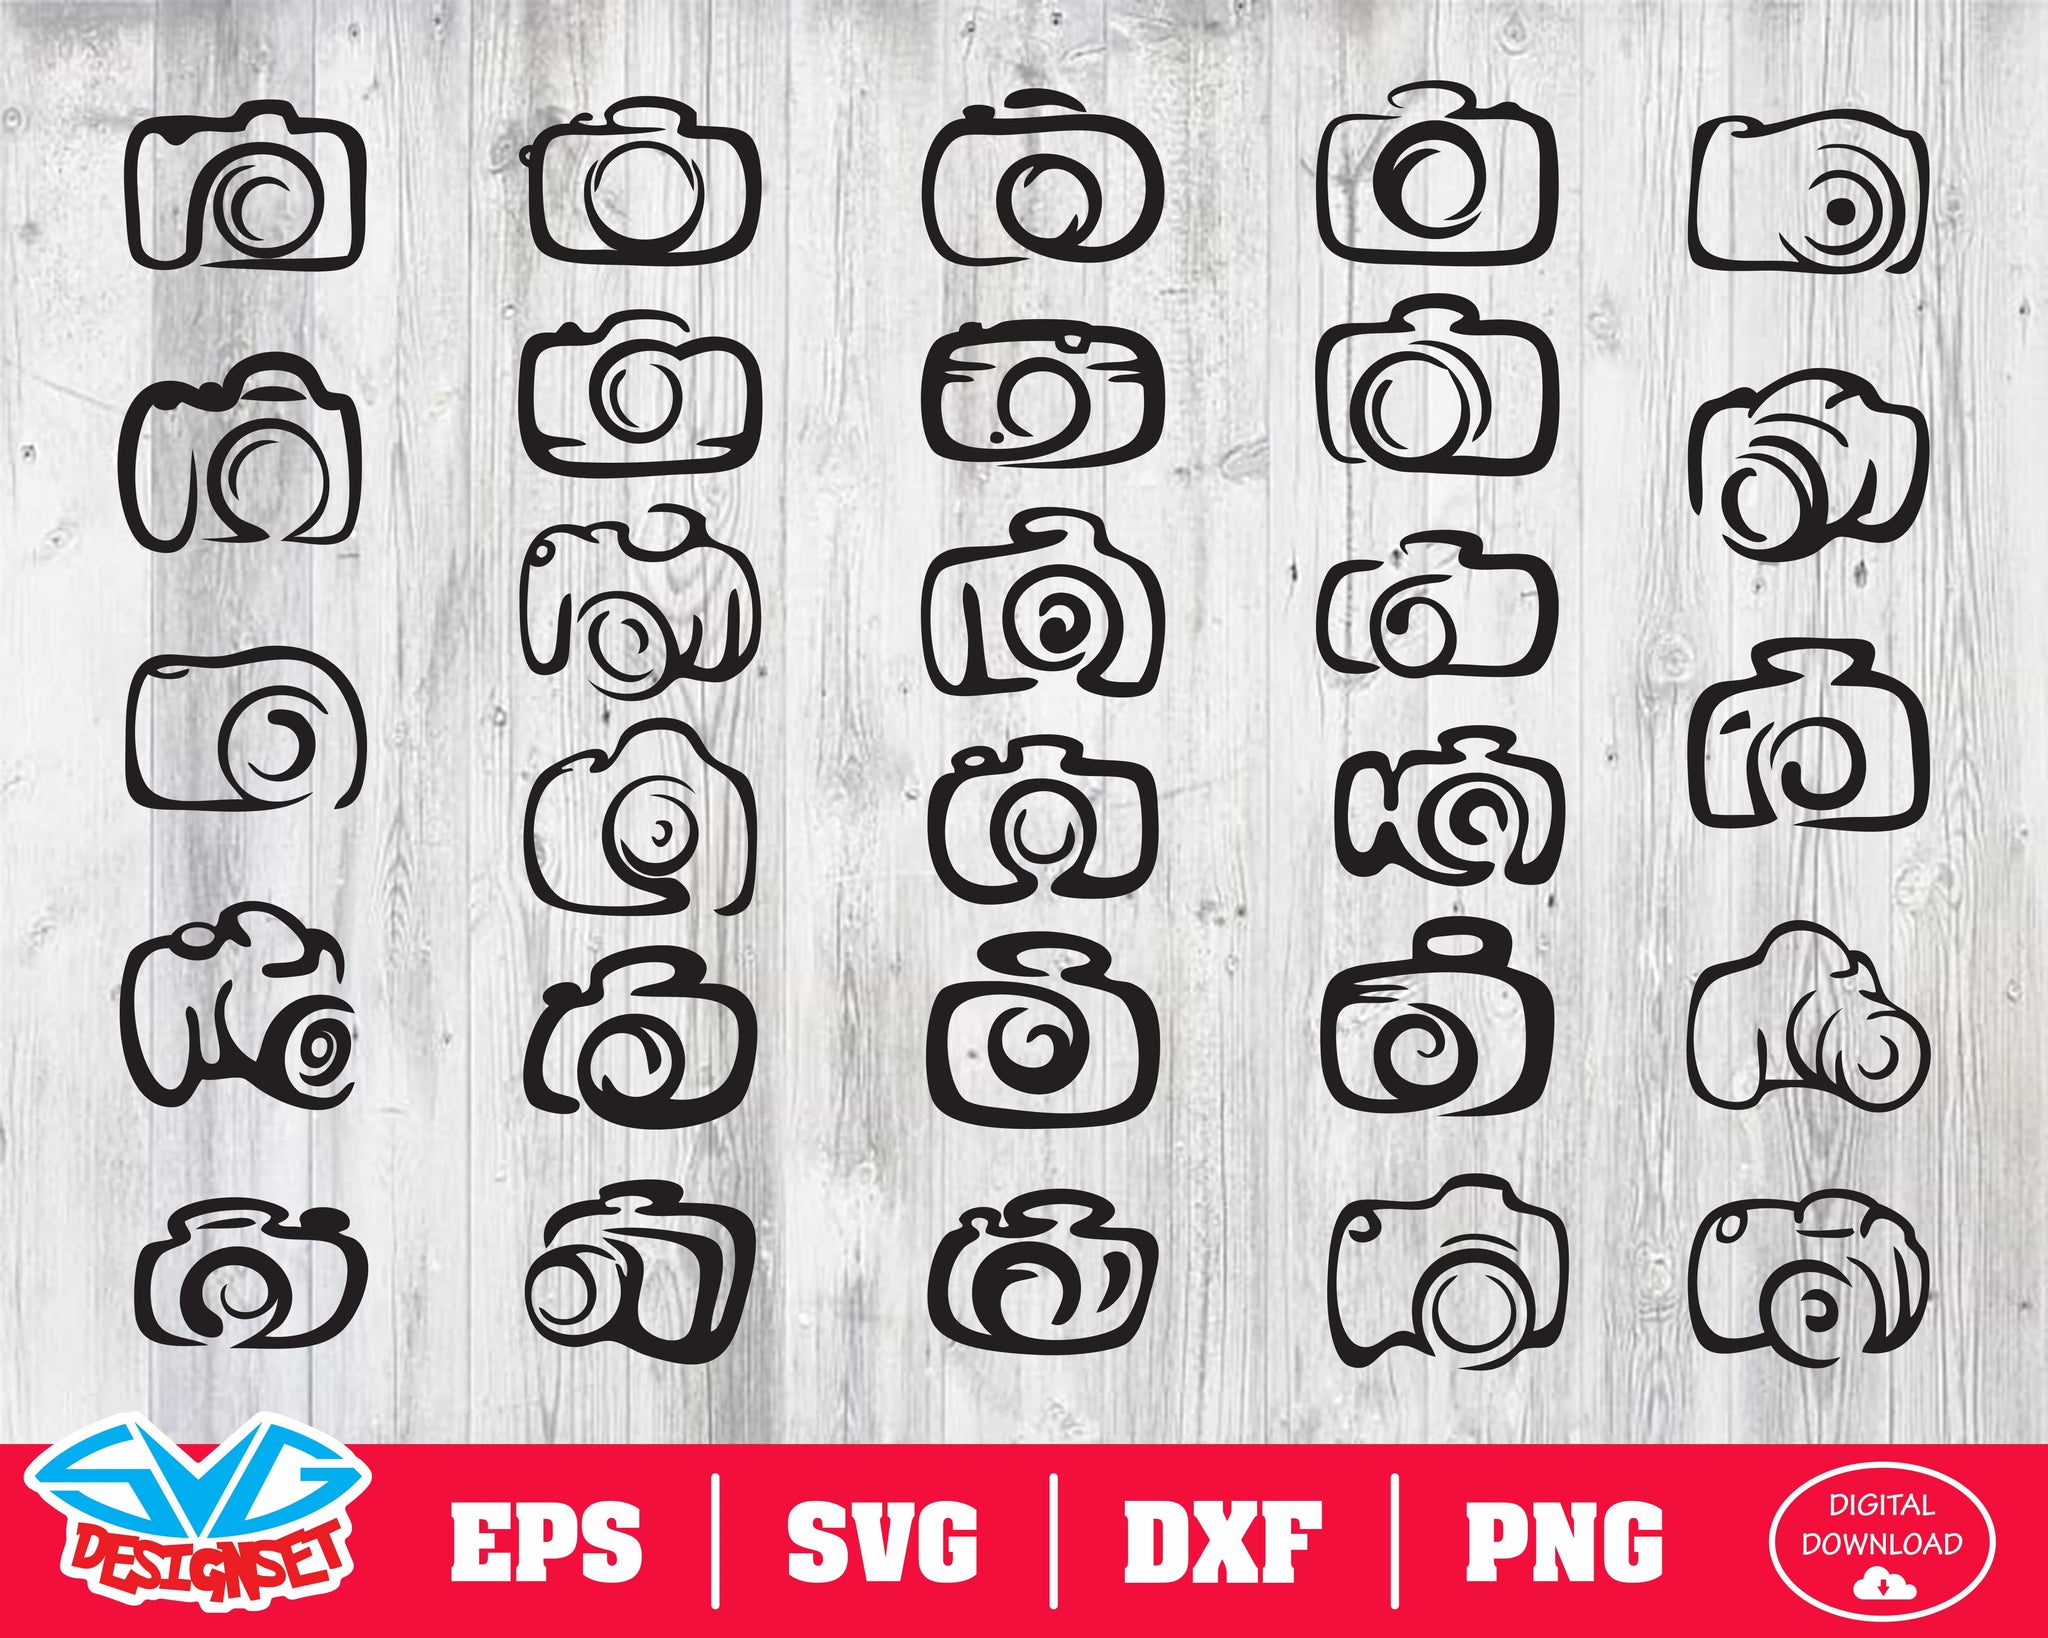 Camera icons Svg, Dxf, Eps, Png, Clipart, Silhouette and Cutfiles - SVGDesignSets